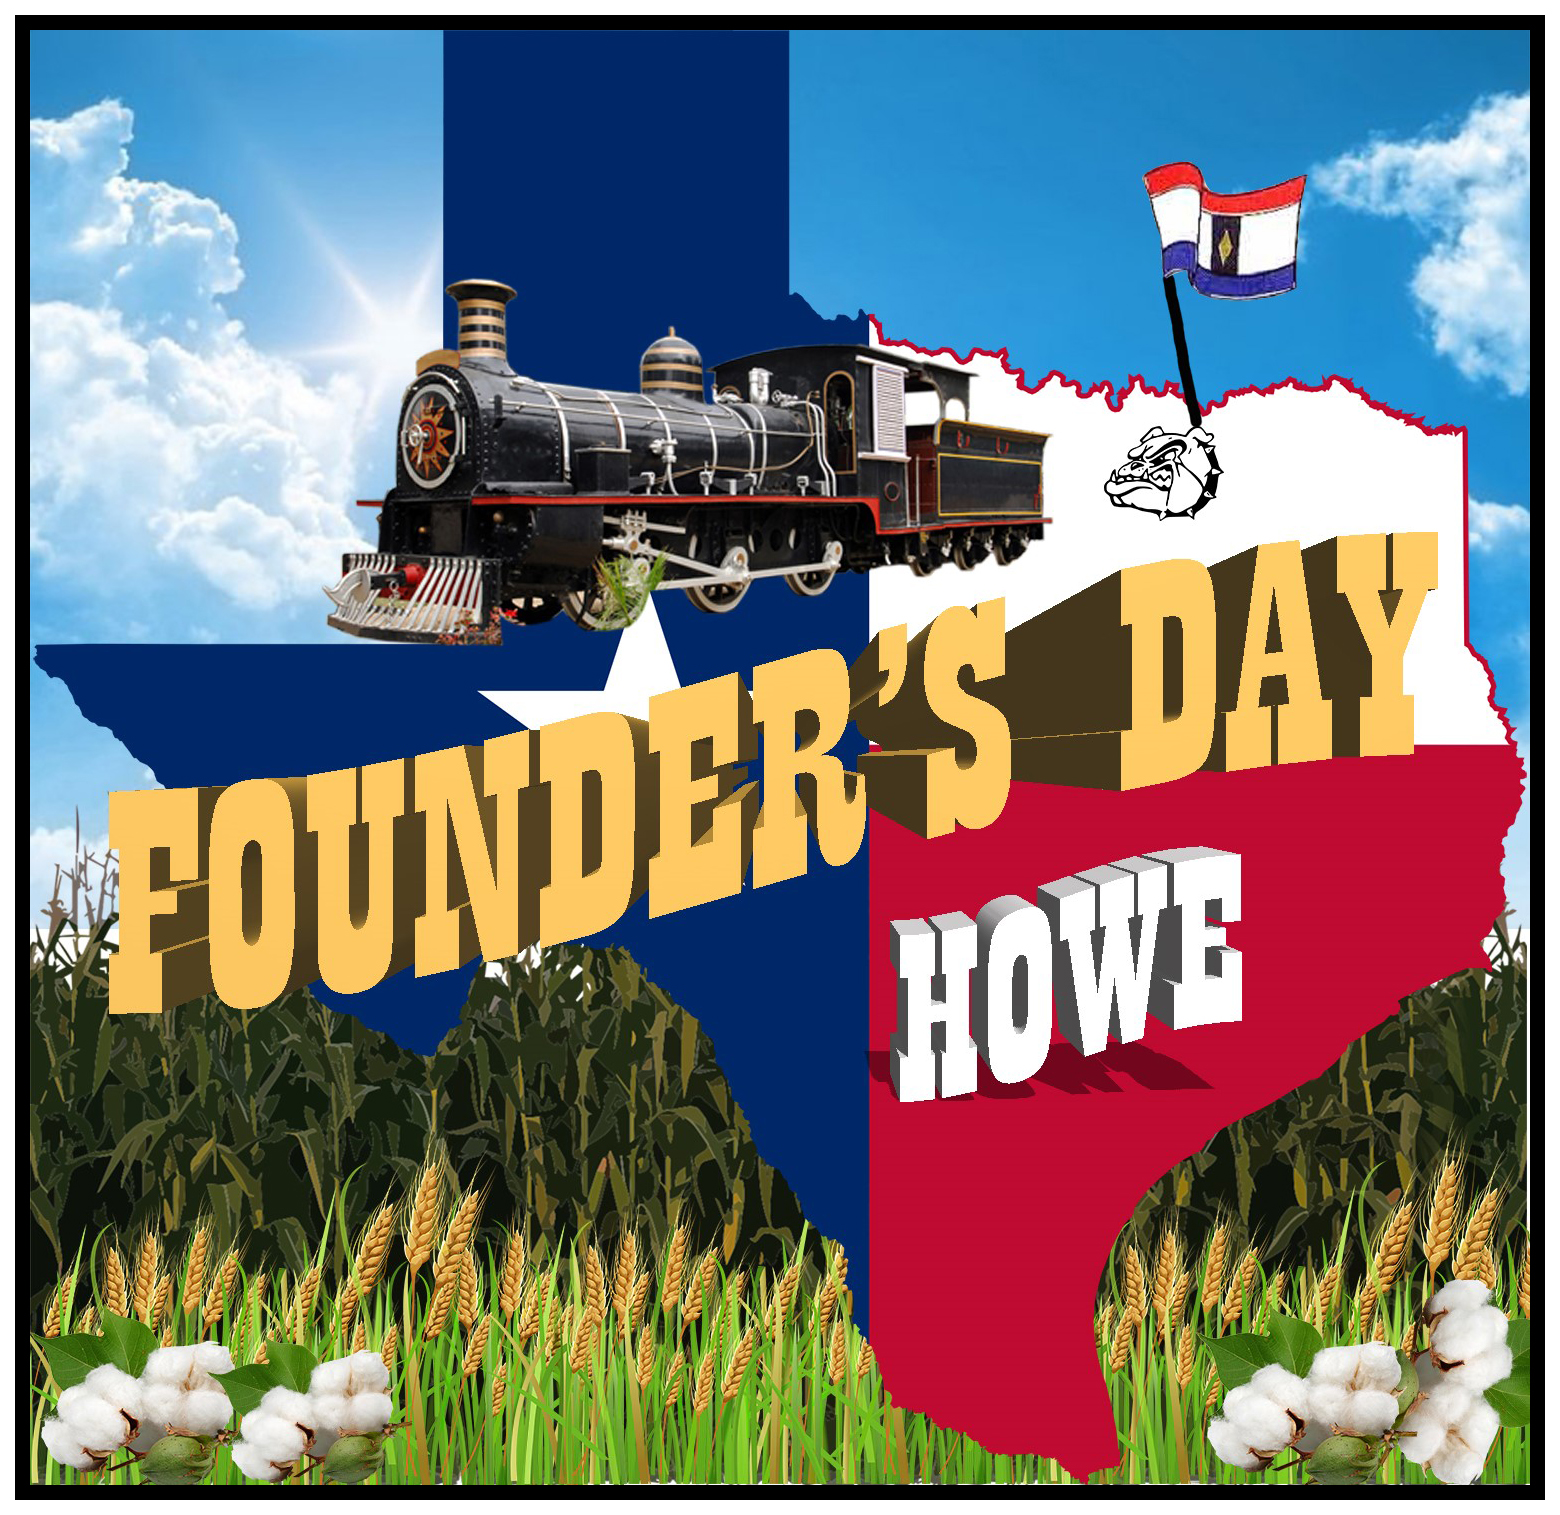 Founders Day Festival to give you the chance to race lawnmowers and